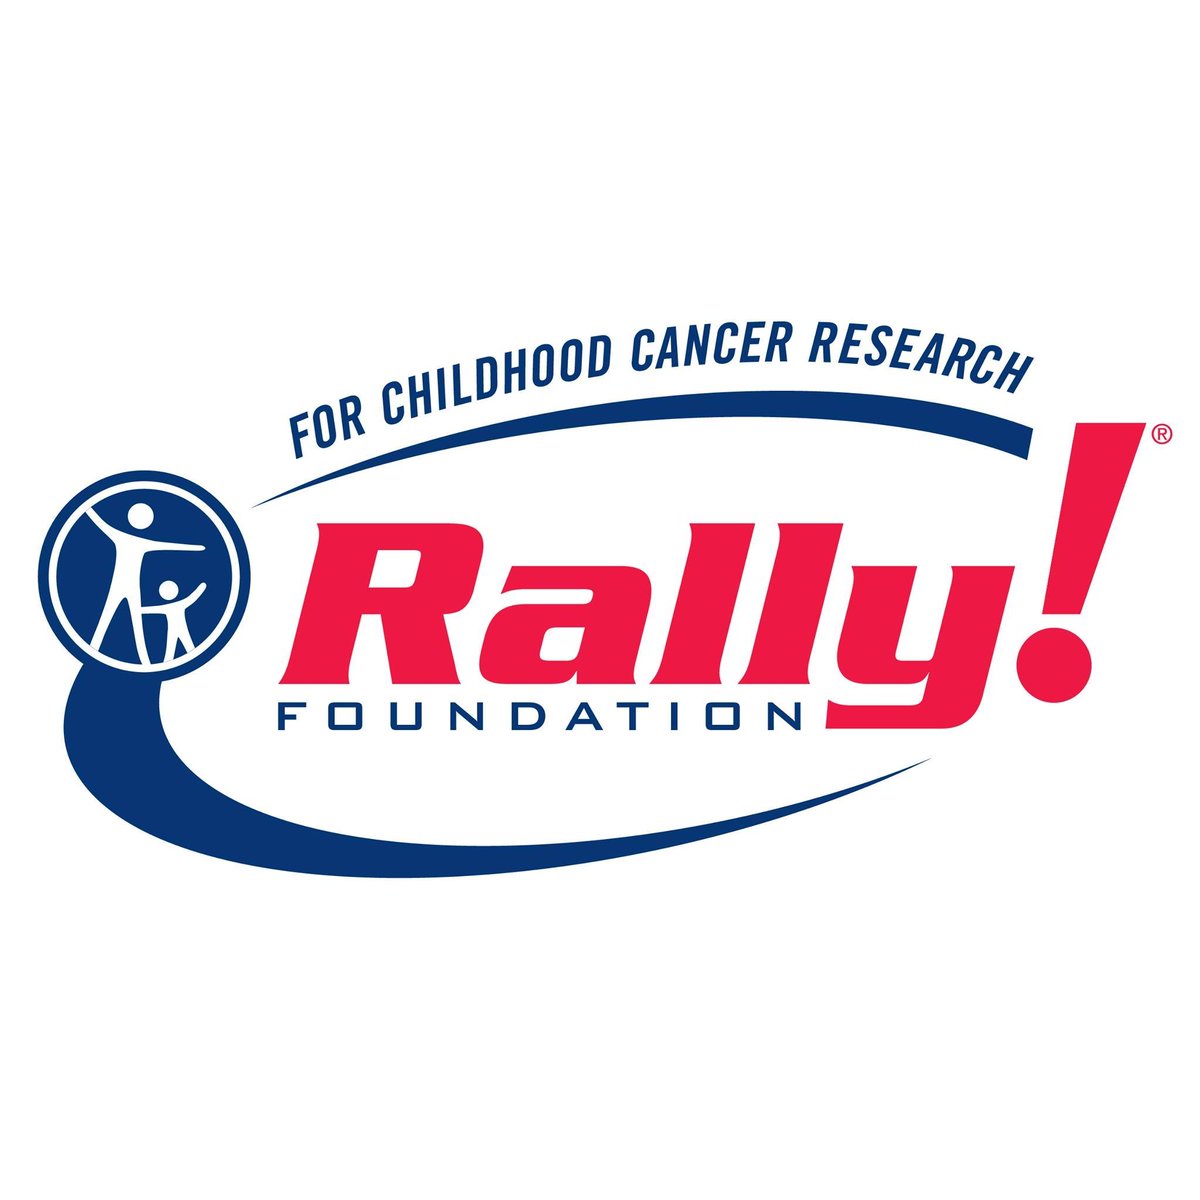 Thank you @RallyFoundation for joining the Osteosarcoma Institute to support research led by @Jyustein, MD, PhD at Emory University! His research aims to make immunotherapies effective for high-risk osteosarcoma. Read more about Dr. Yustein’s study at osinst.org/yustein-resear….